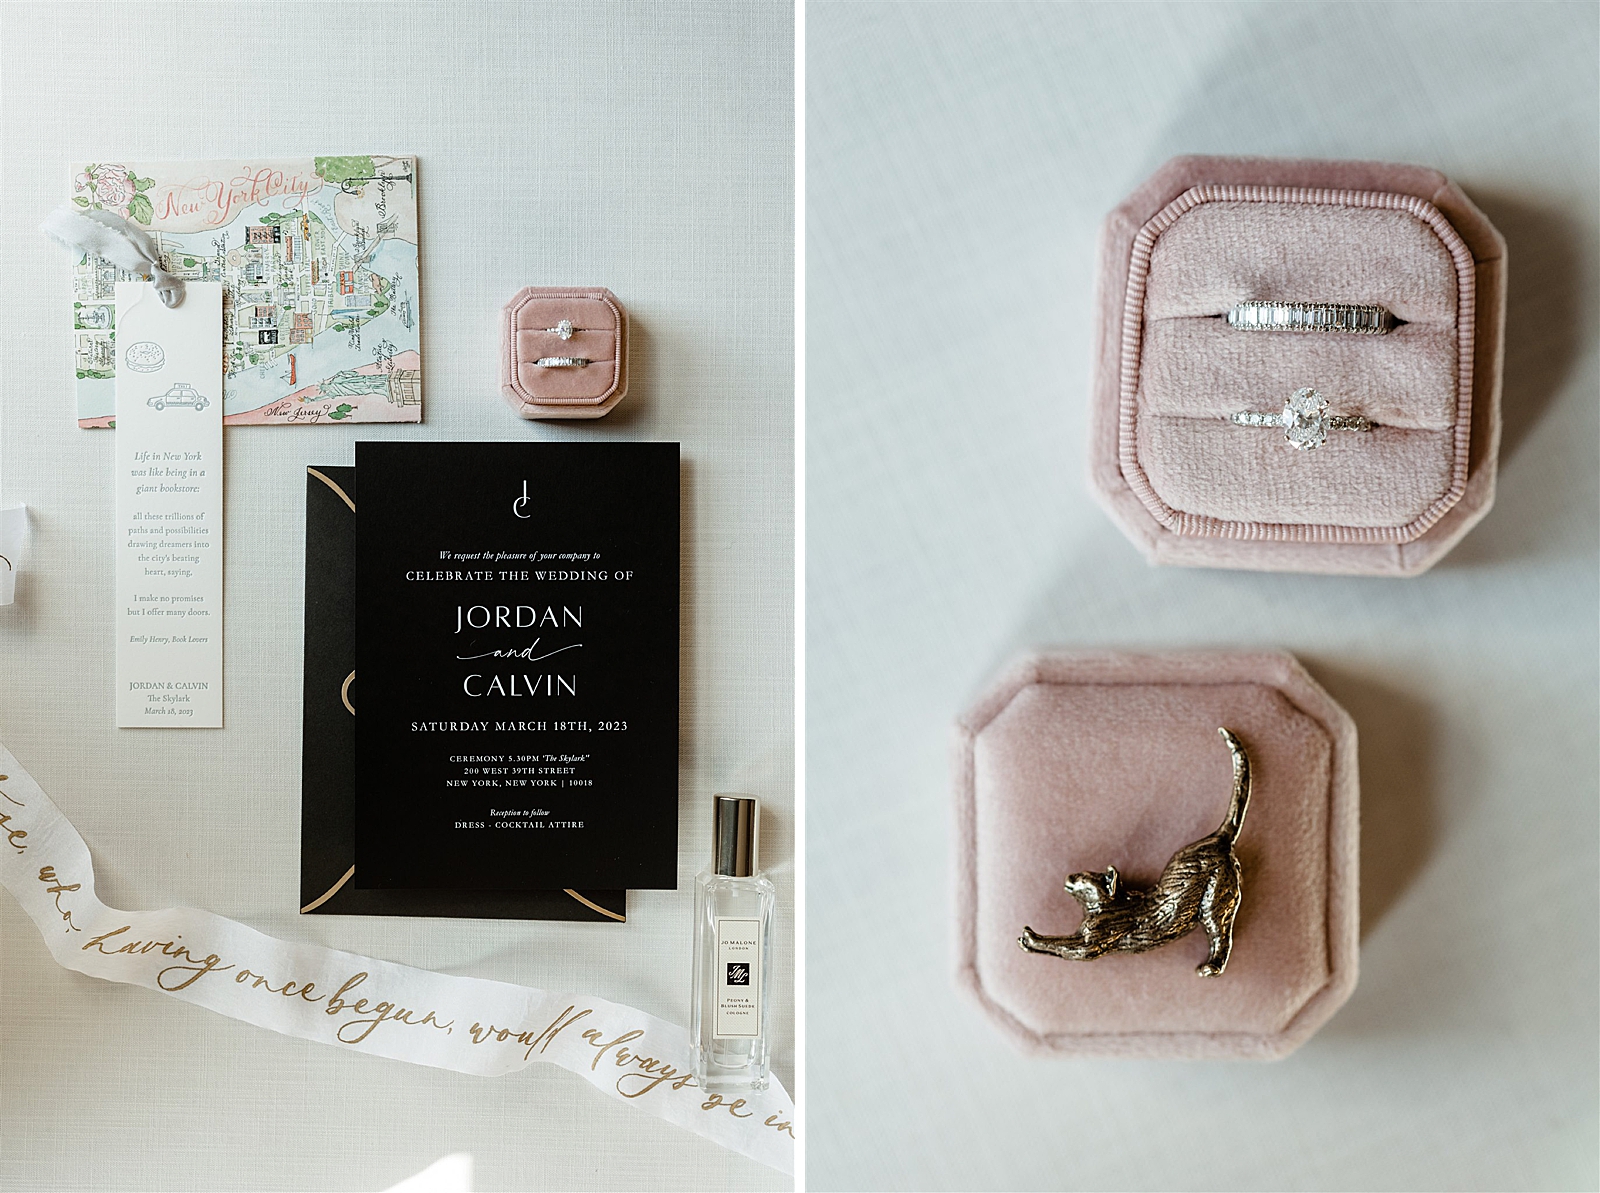 Left photo: Shot of wedding details including invitations, rings, and a custom bookmark. 
Right photo: UP close shot of the bride and grooms rings and a gold cat pin. 